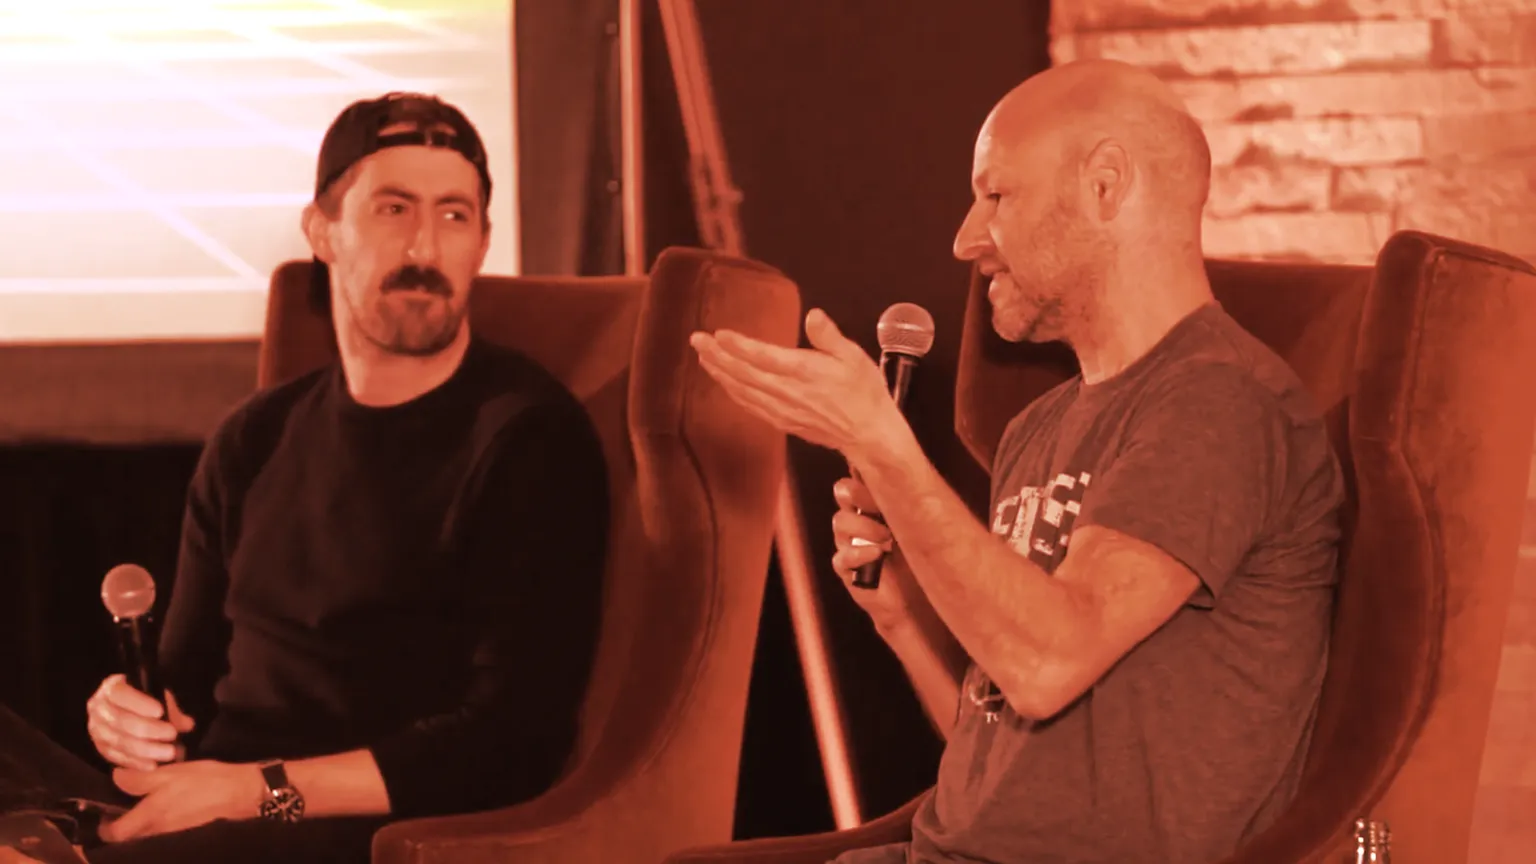 ConsenSys CEO Joseph Lubin (right) speaks at Camp Ethereal 2022. Image: Decrypt